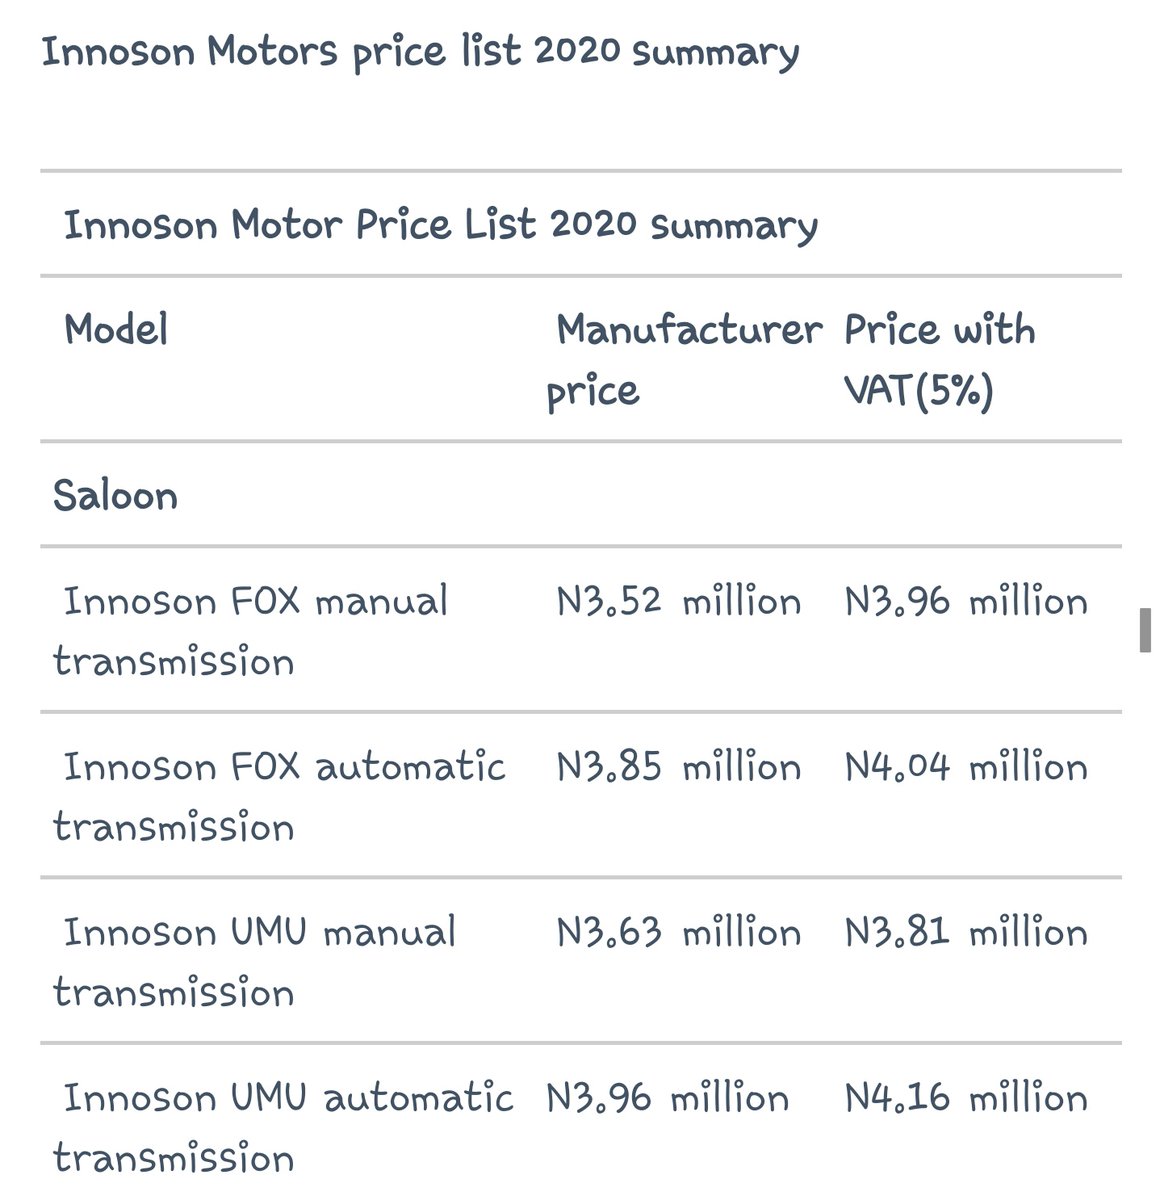 Here's a full list of innocent vehicles and their prices